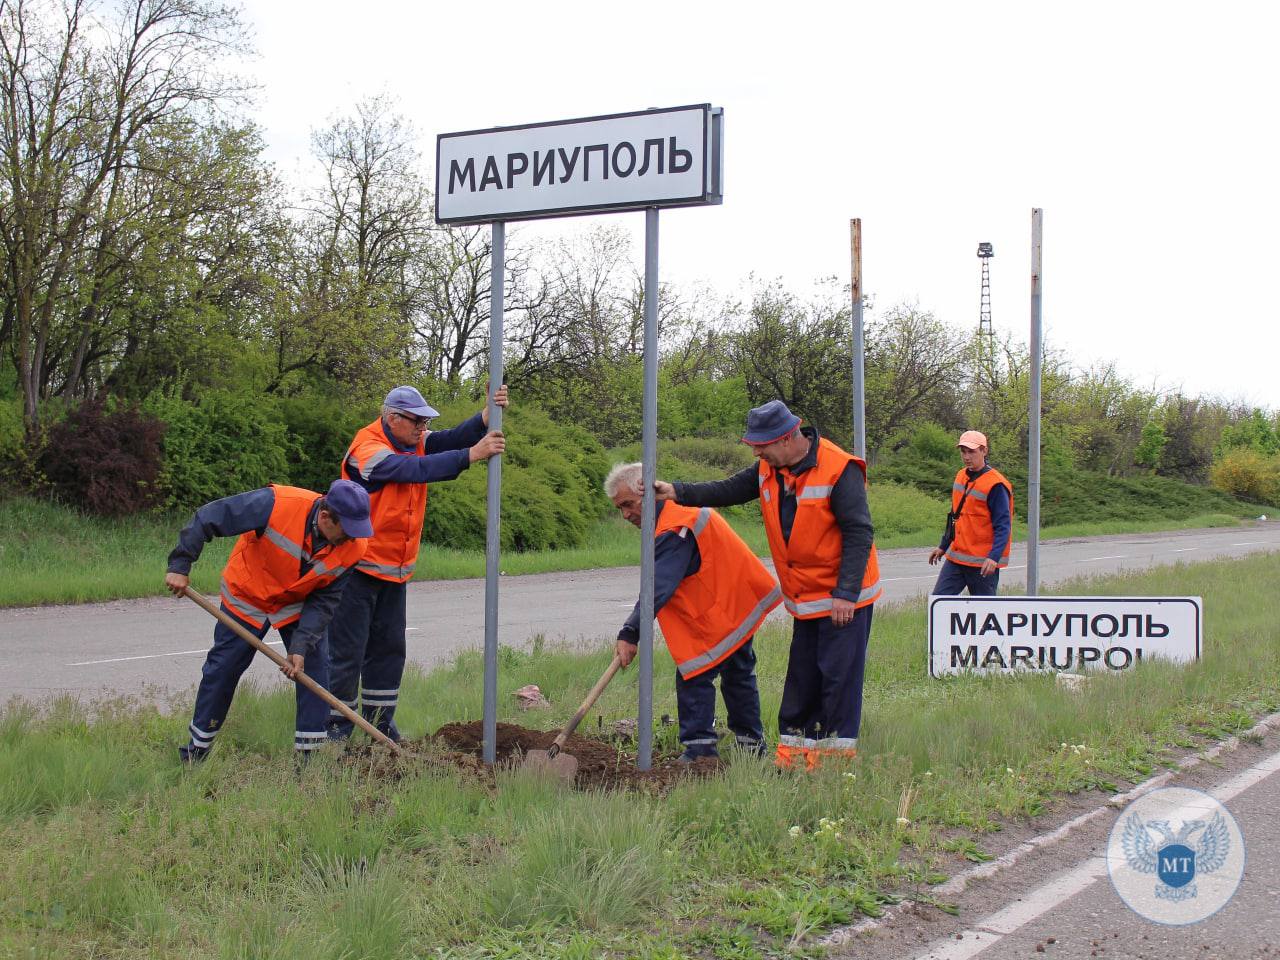 In Mariupol occupiers are changing Ukrainian signs to Russian while people have nothing to eat – Andryushchenko